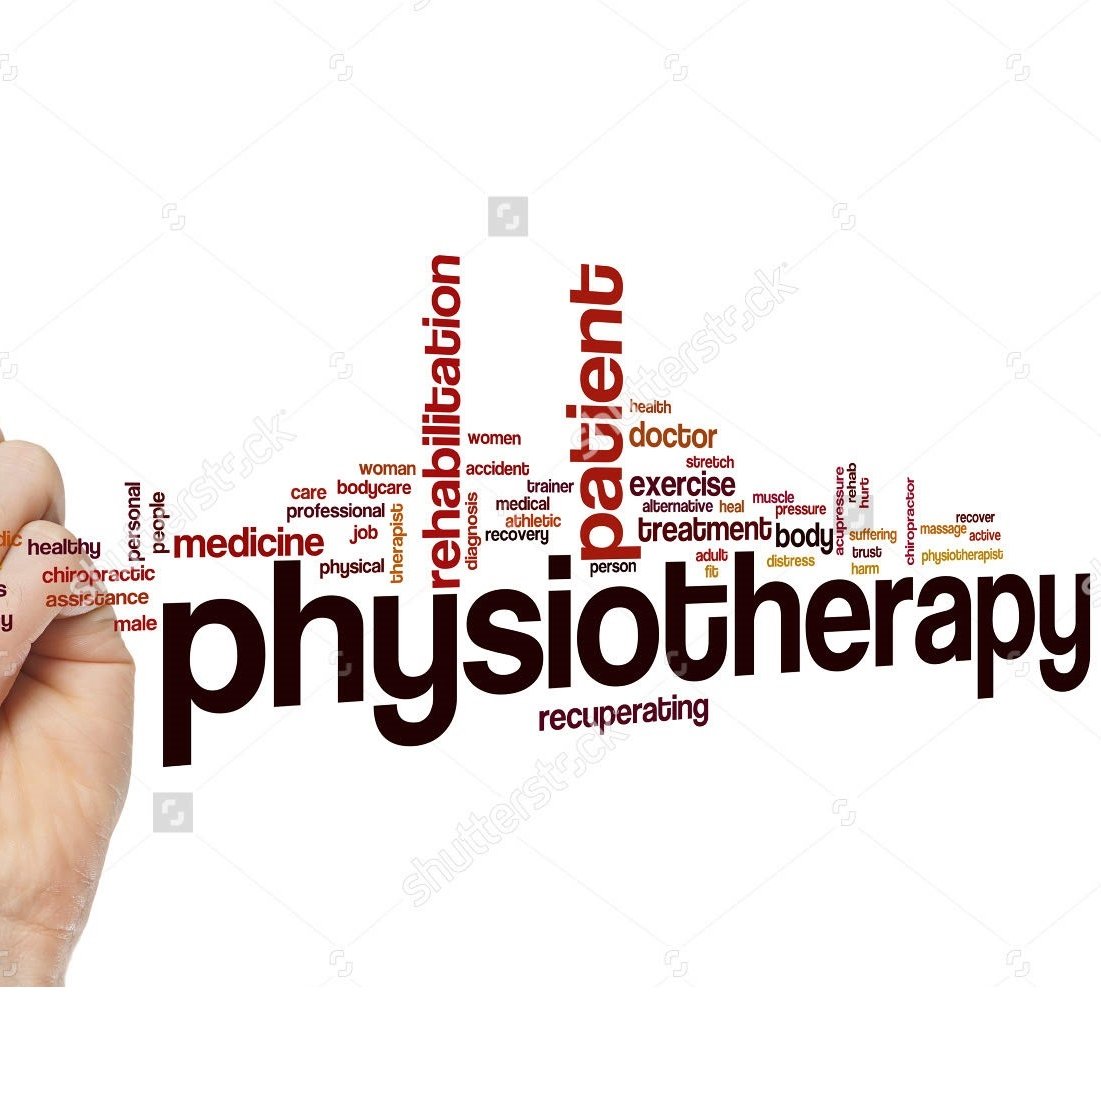 Latest news and Advancements in Field of Physiotherapy and Rehabilitation New research, New Methods and Tools

 Physiotherapy and Rehabilitation News